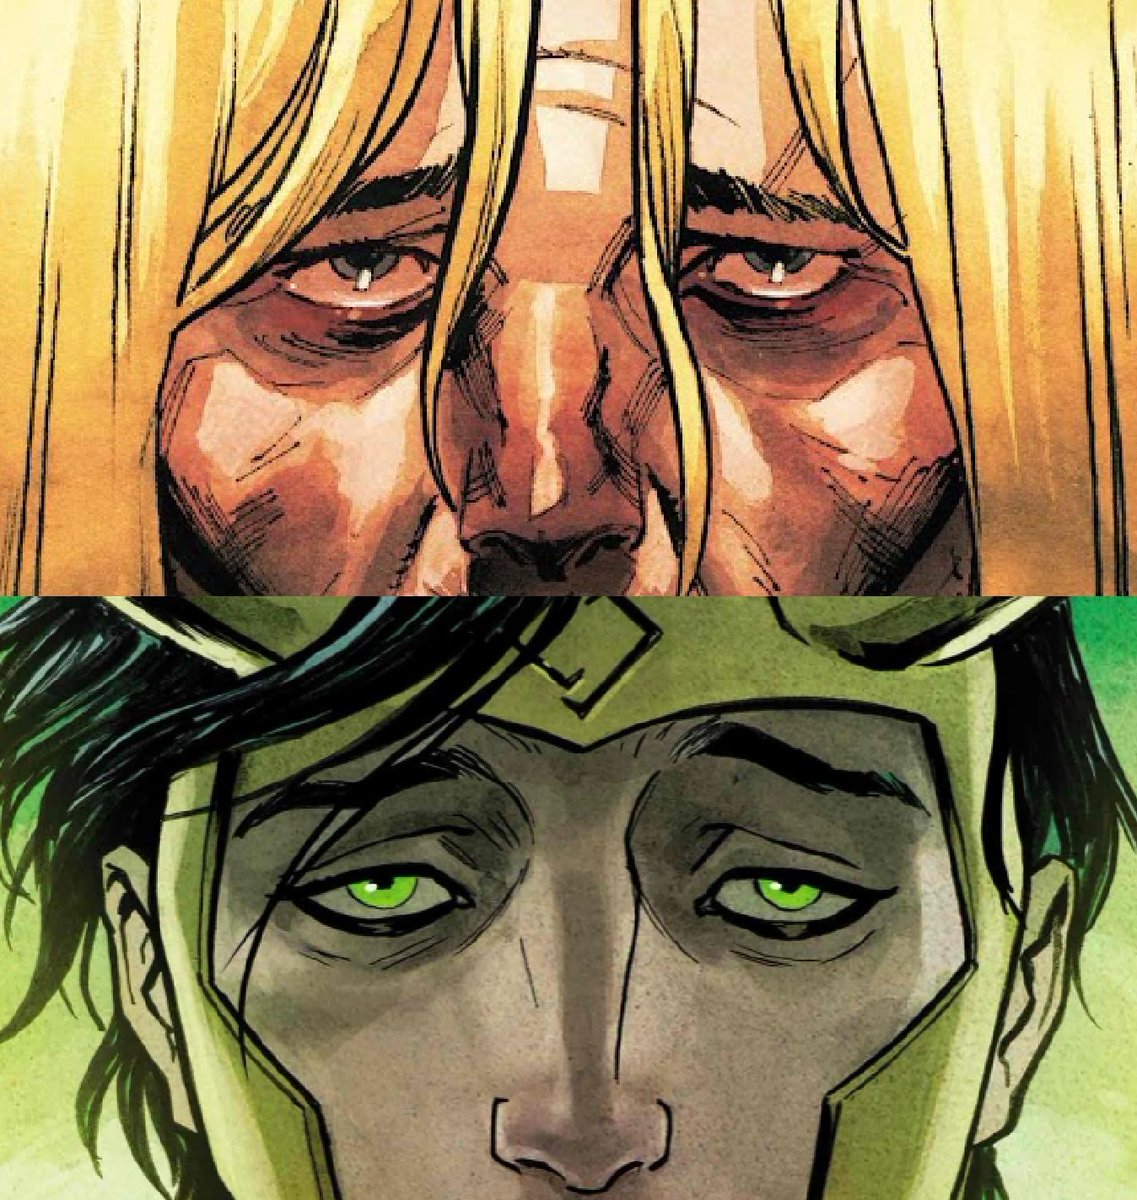 RT @ThorLawyer: Thor and Loki have seen some dark events throughout their immortal lives the eyes says it all- https://t.co/KSkrO2arMf